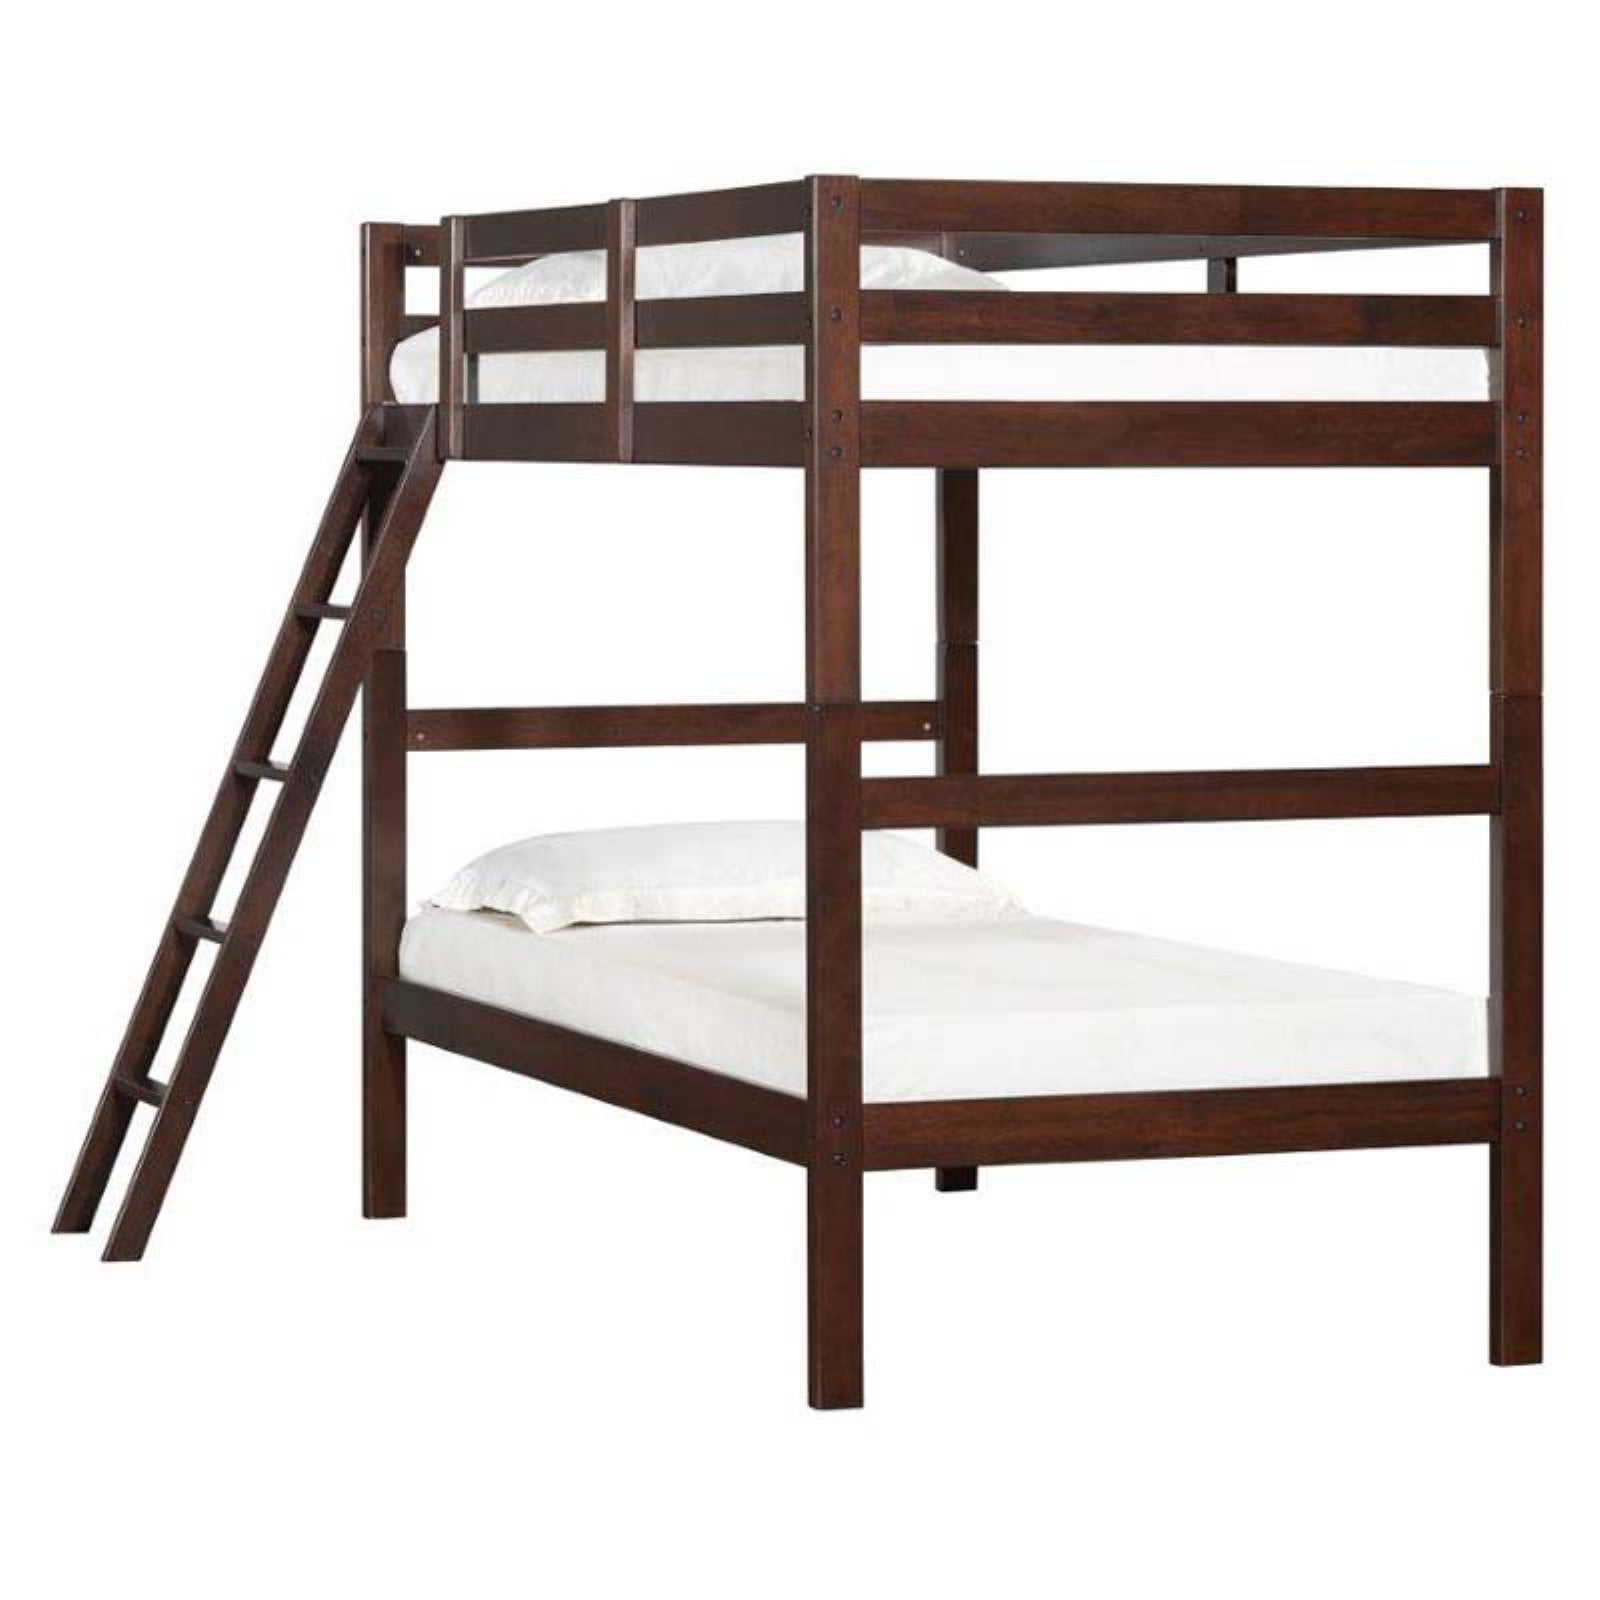 Simmons Mission Hills Twin Over, Simmons Tristan Bunk Bed Instructions